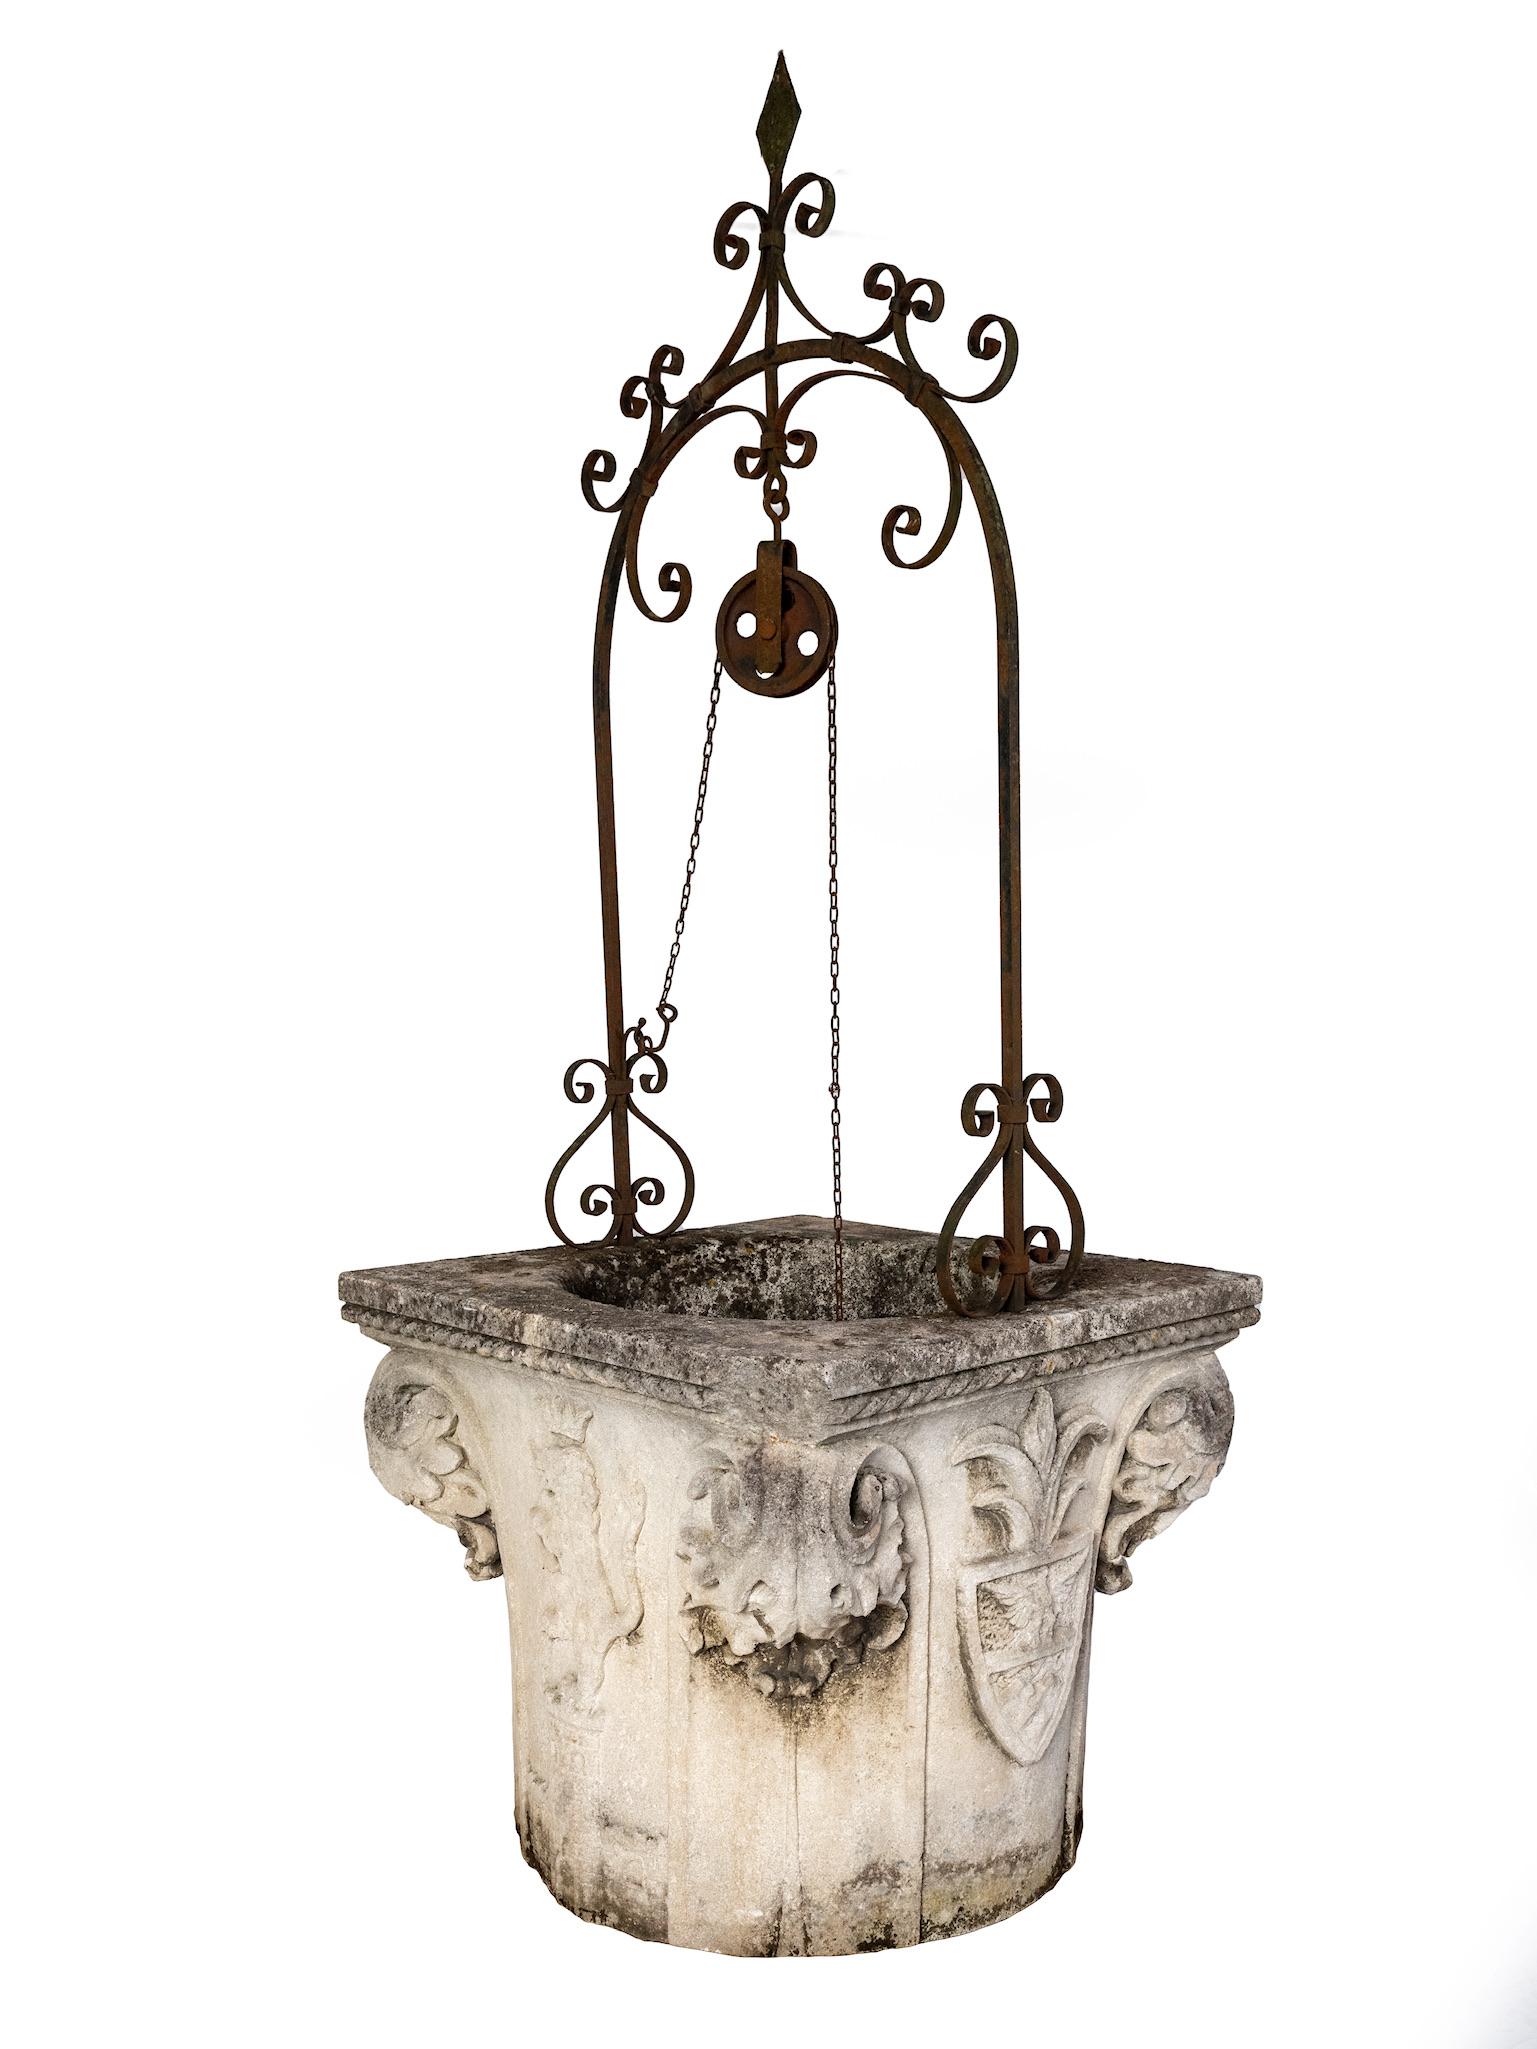 An 18th century Vincenza stone wellhead. This came from a palazzo in Veneto region of Italy.